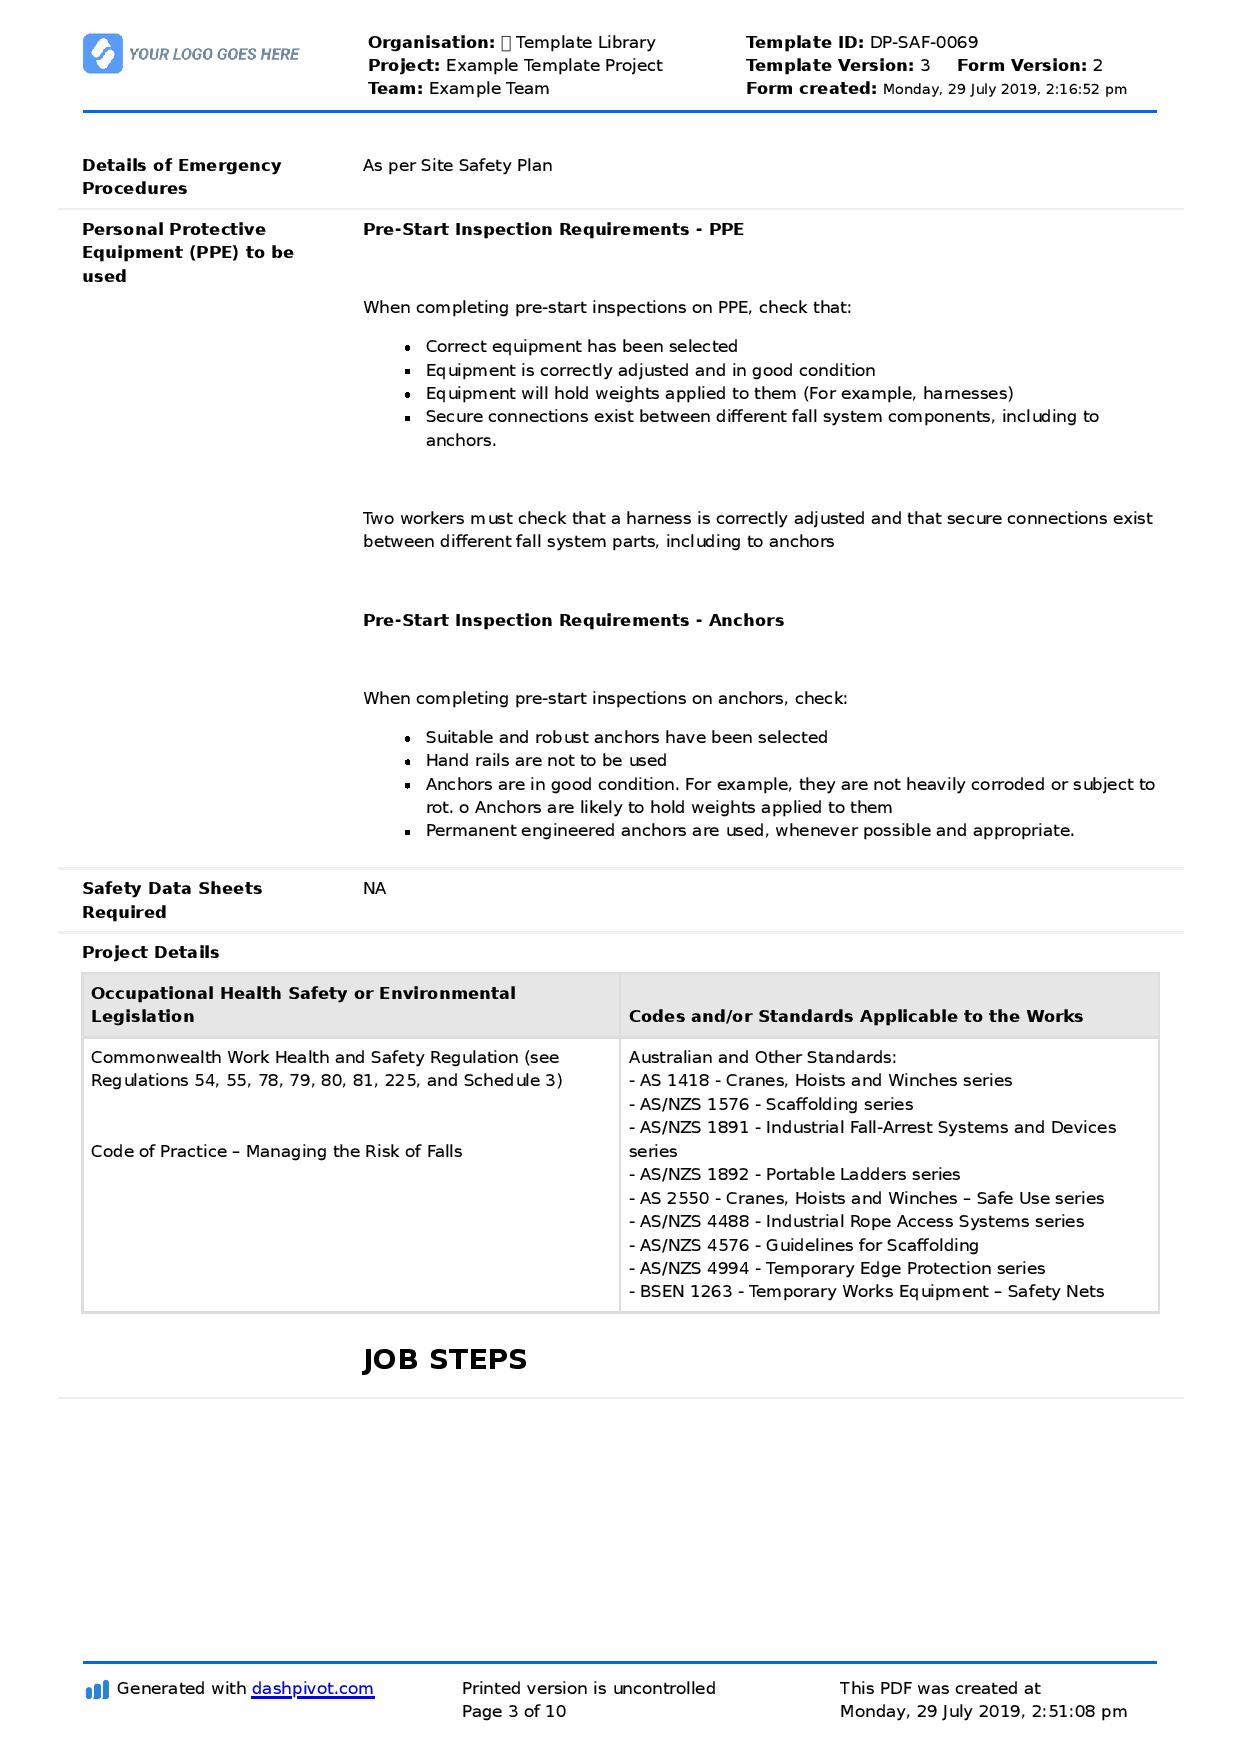 Safe Work Method Statement Working At Heights Template (Use It Free) intended for Safe Work Method Statement Template